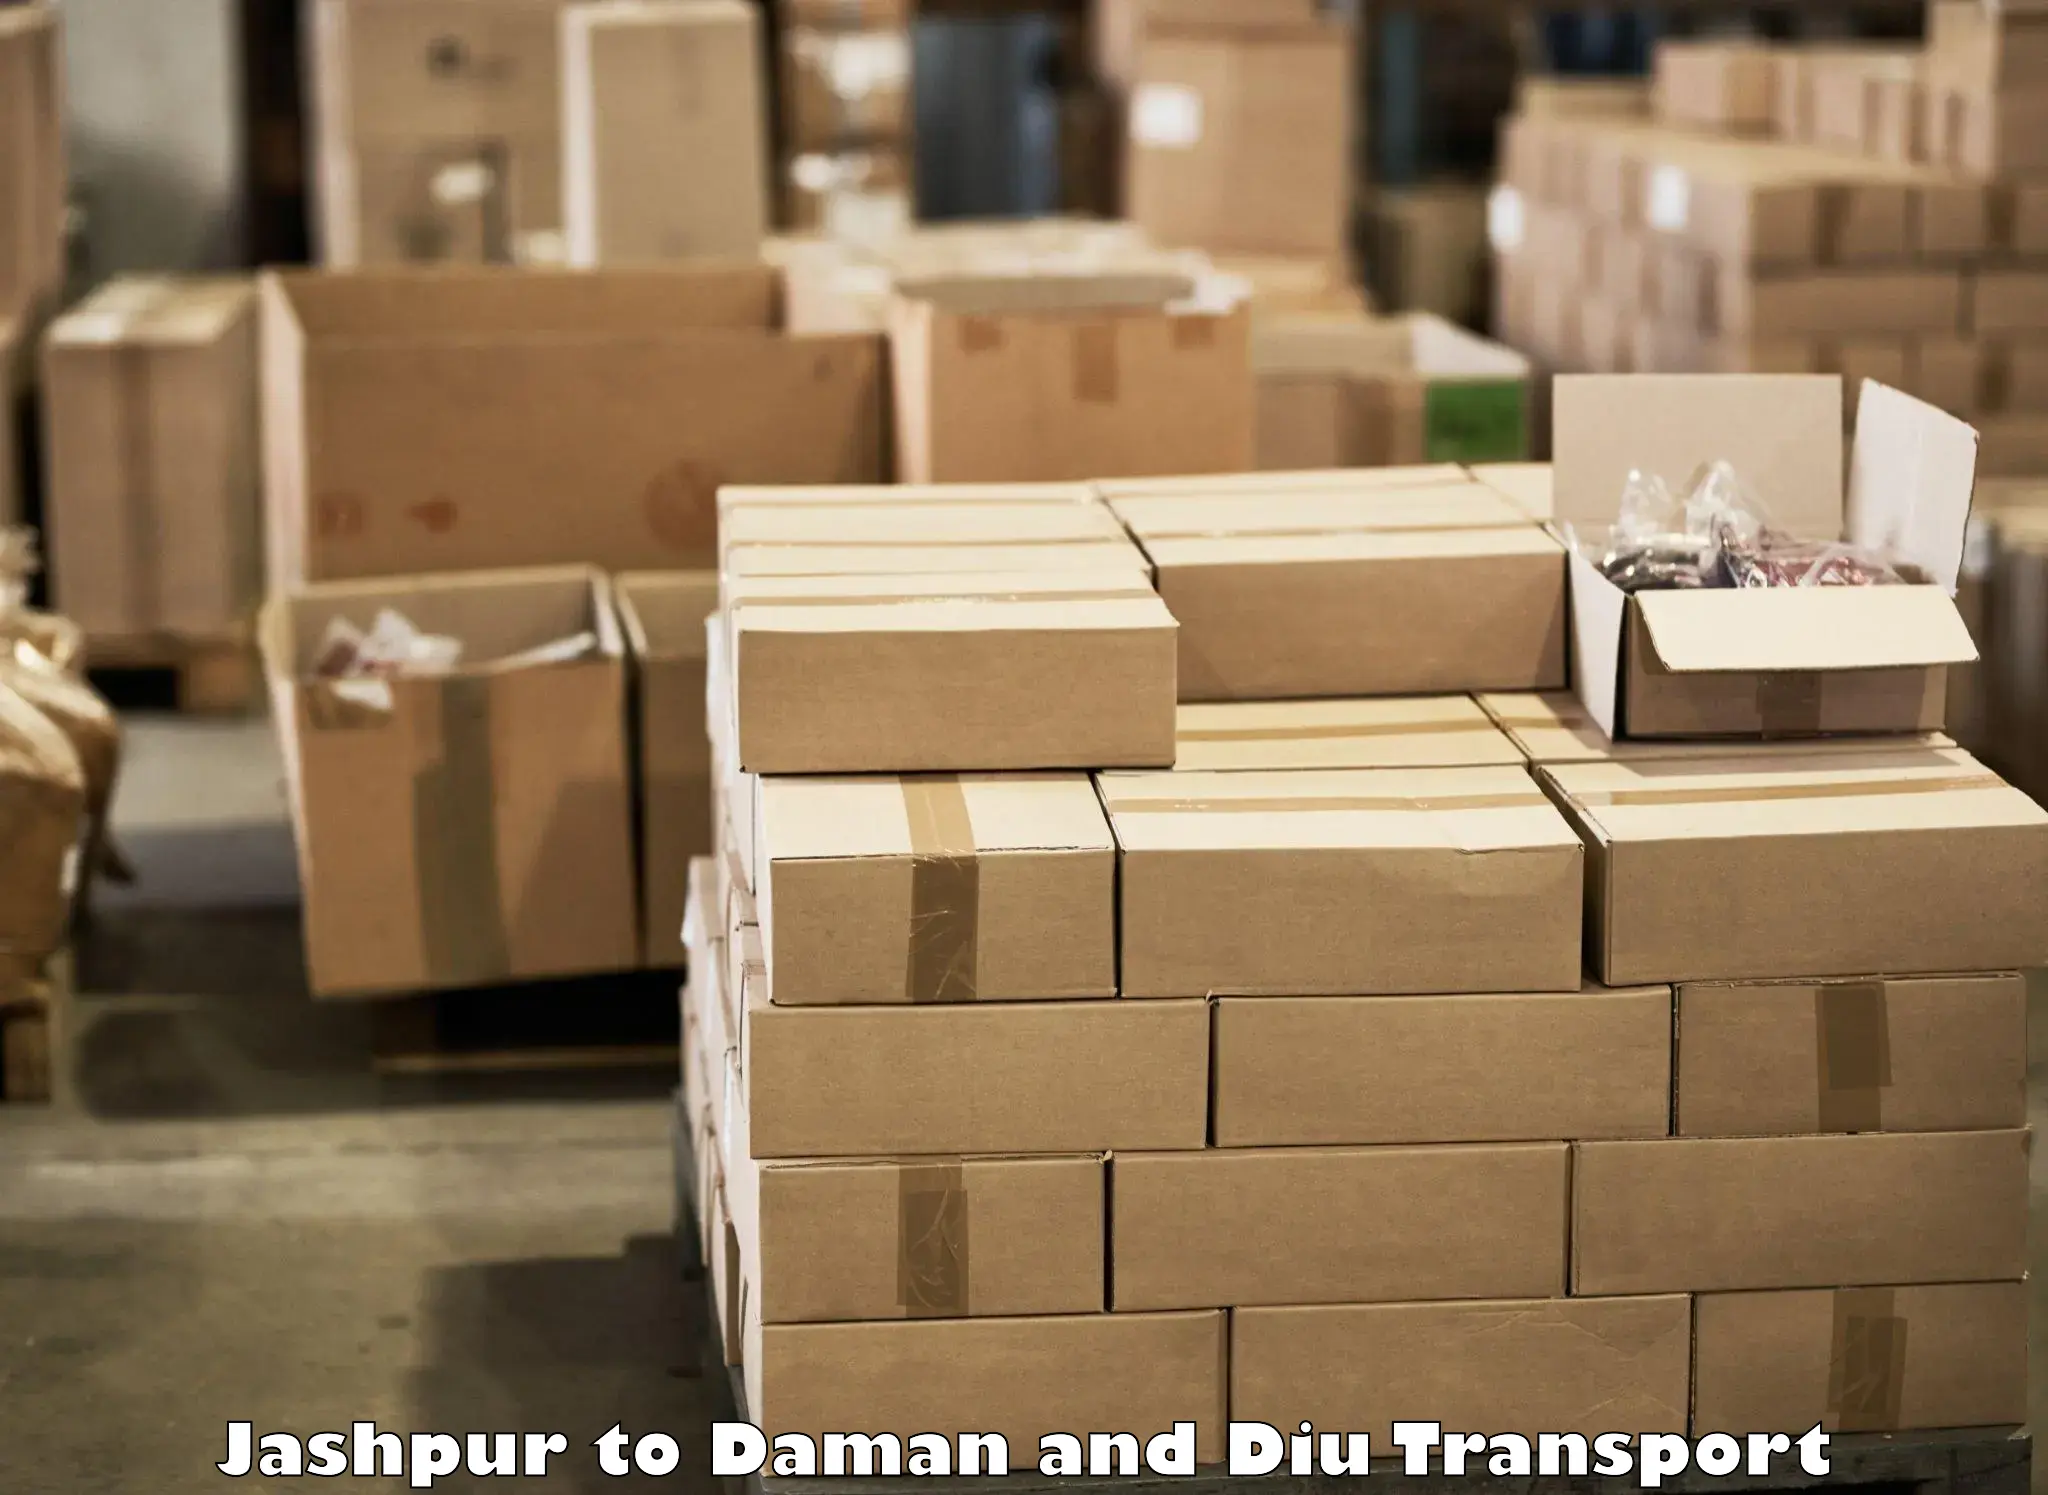 Daily transport service in Jashpur to Daman and Diu